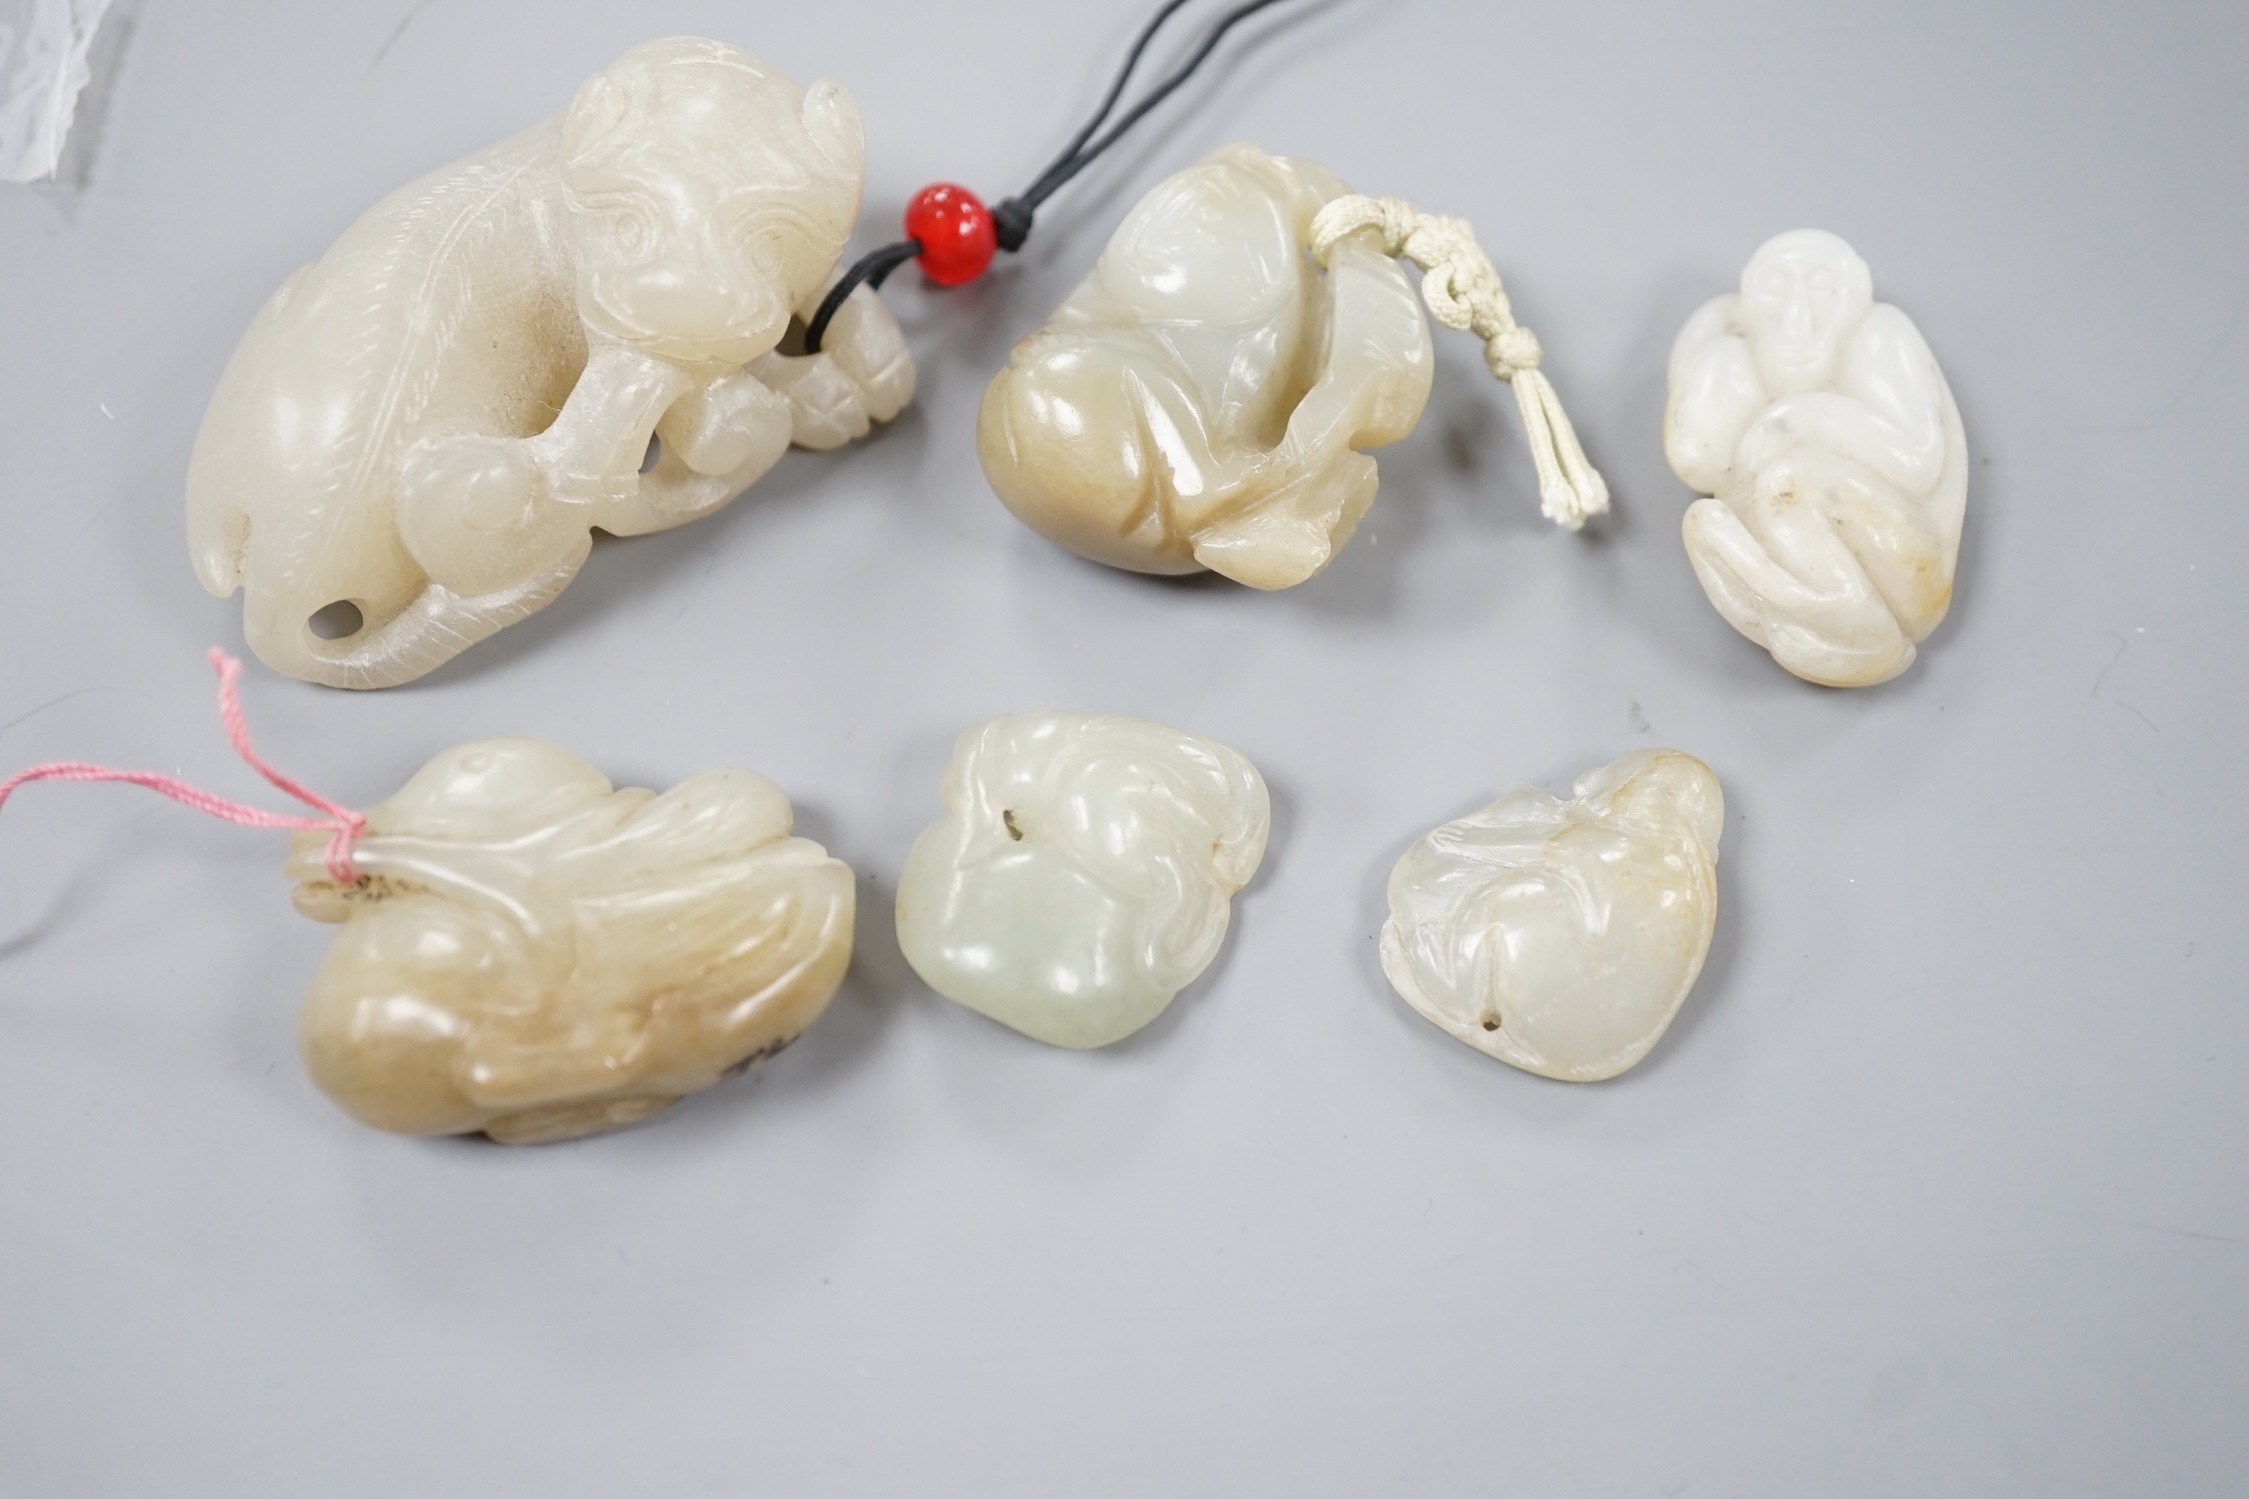 Six pieces of small carved Nephrite Jade figures